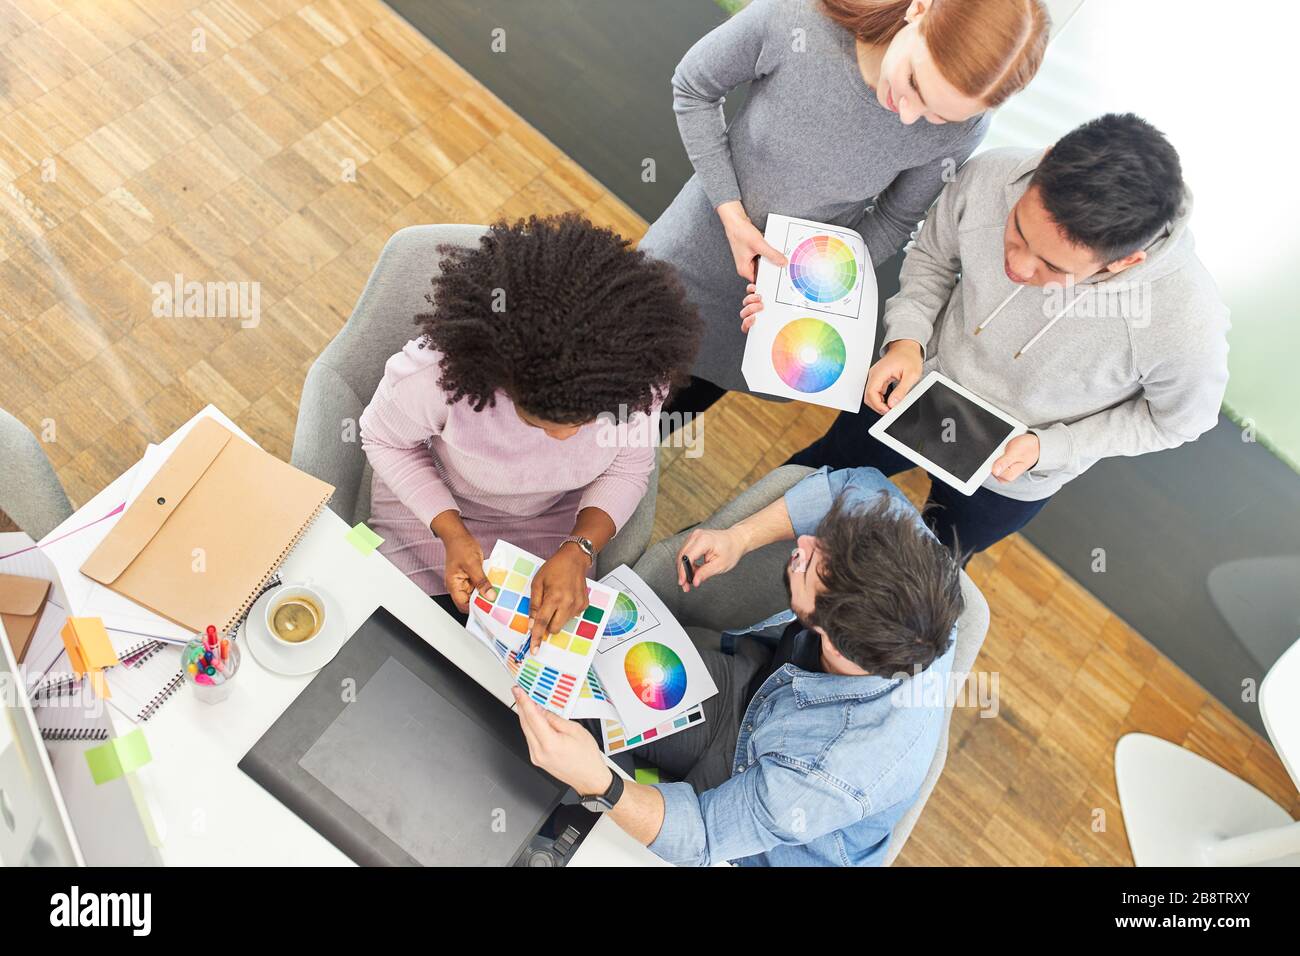 Graphic designer team in internet agency discusses color design of a website Stock Photo